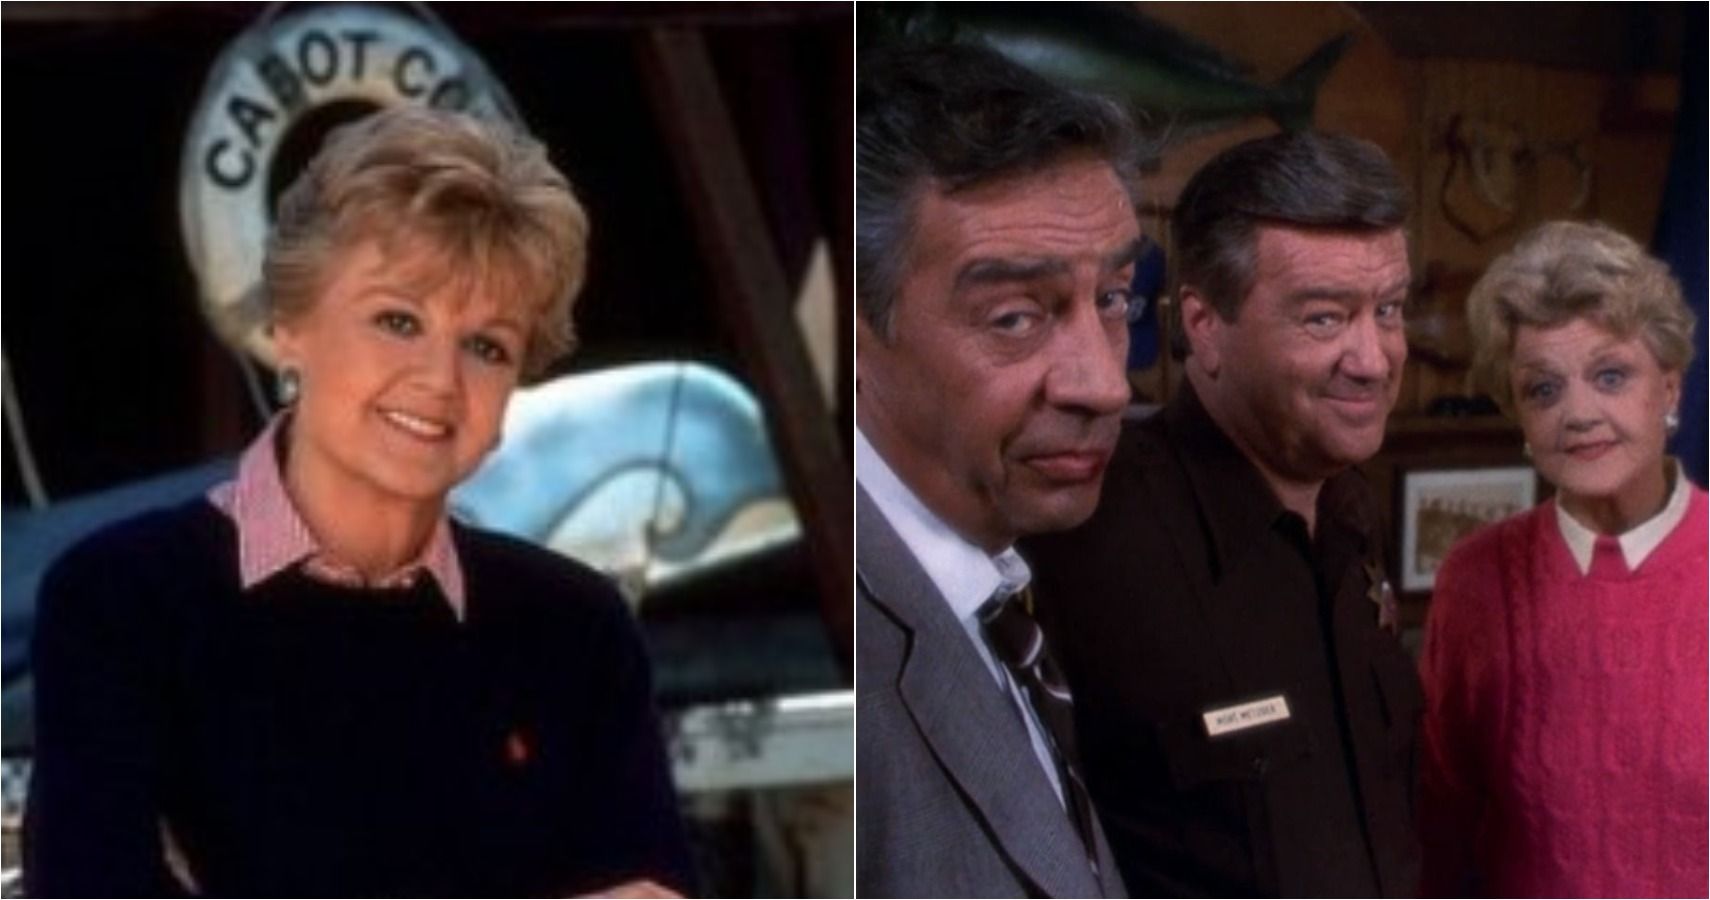 10 Best Cabot Cove Episodes Of Murder She Wrote